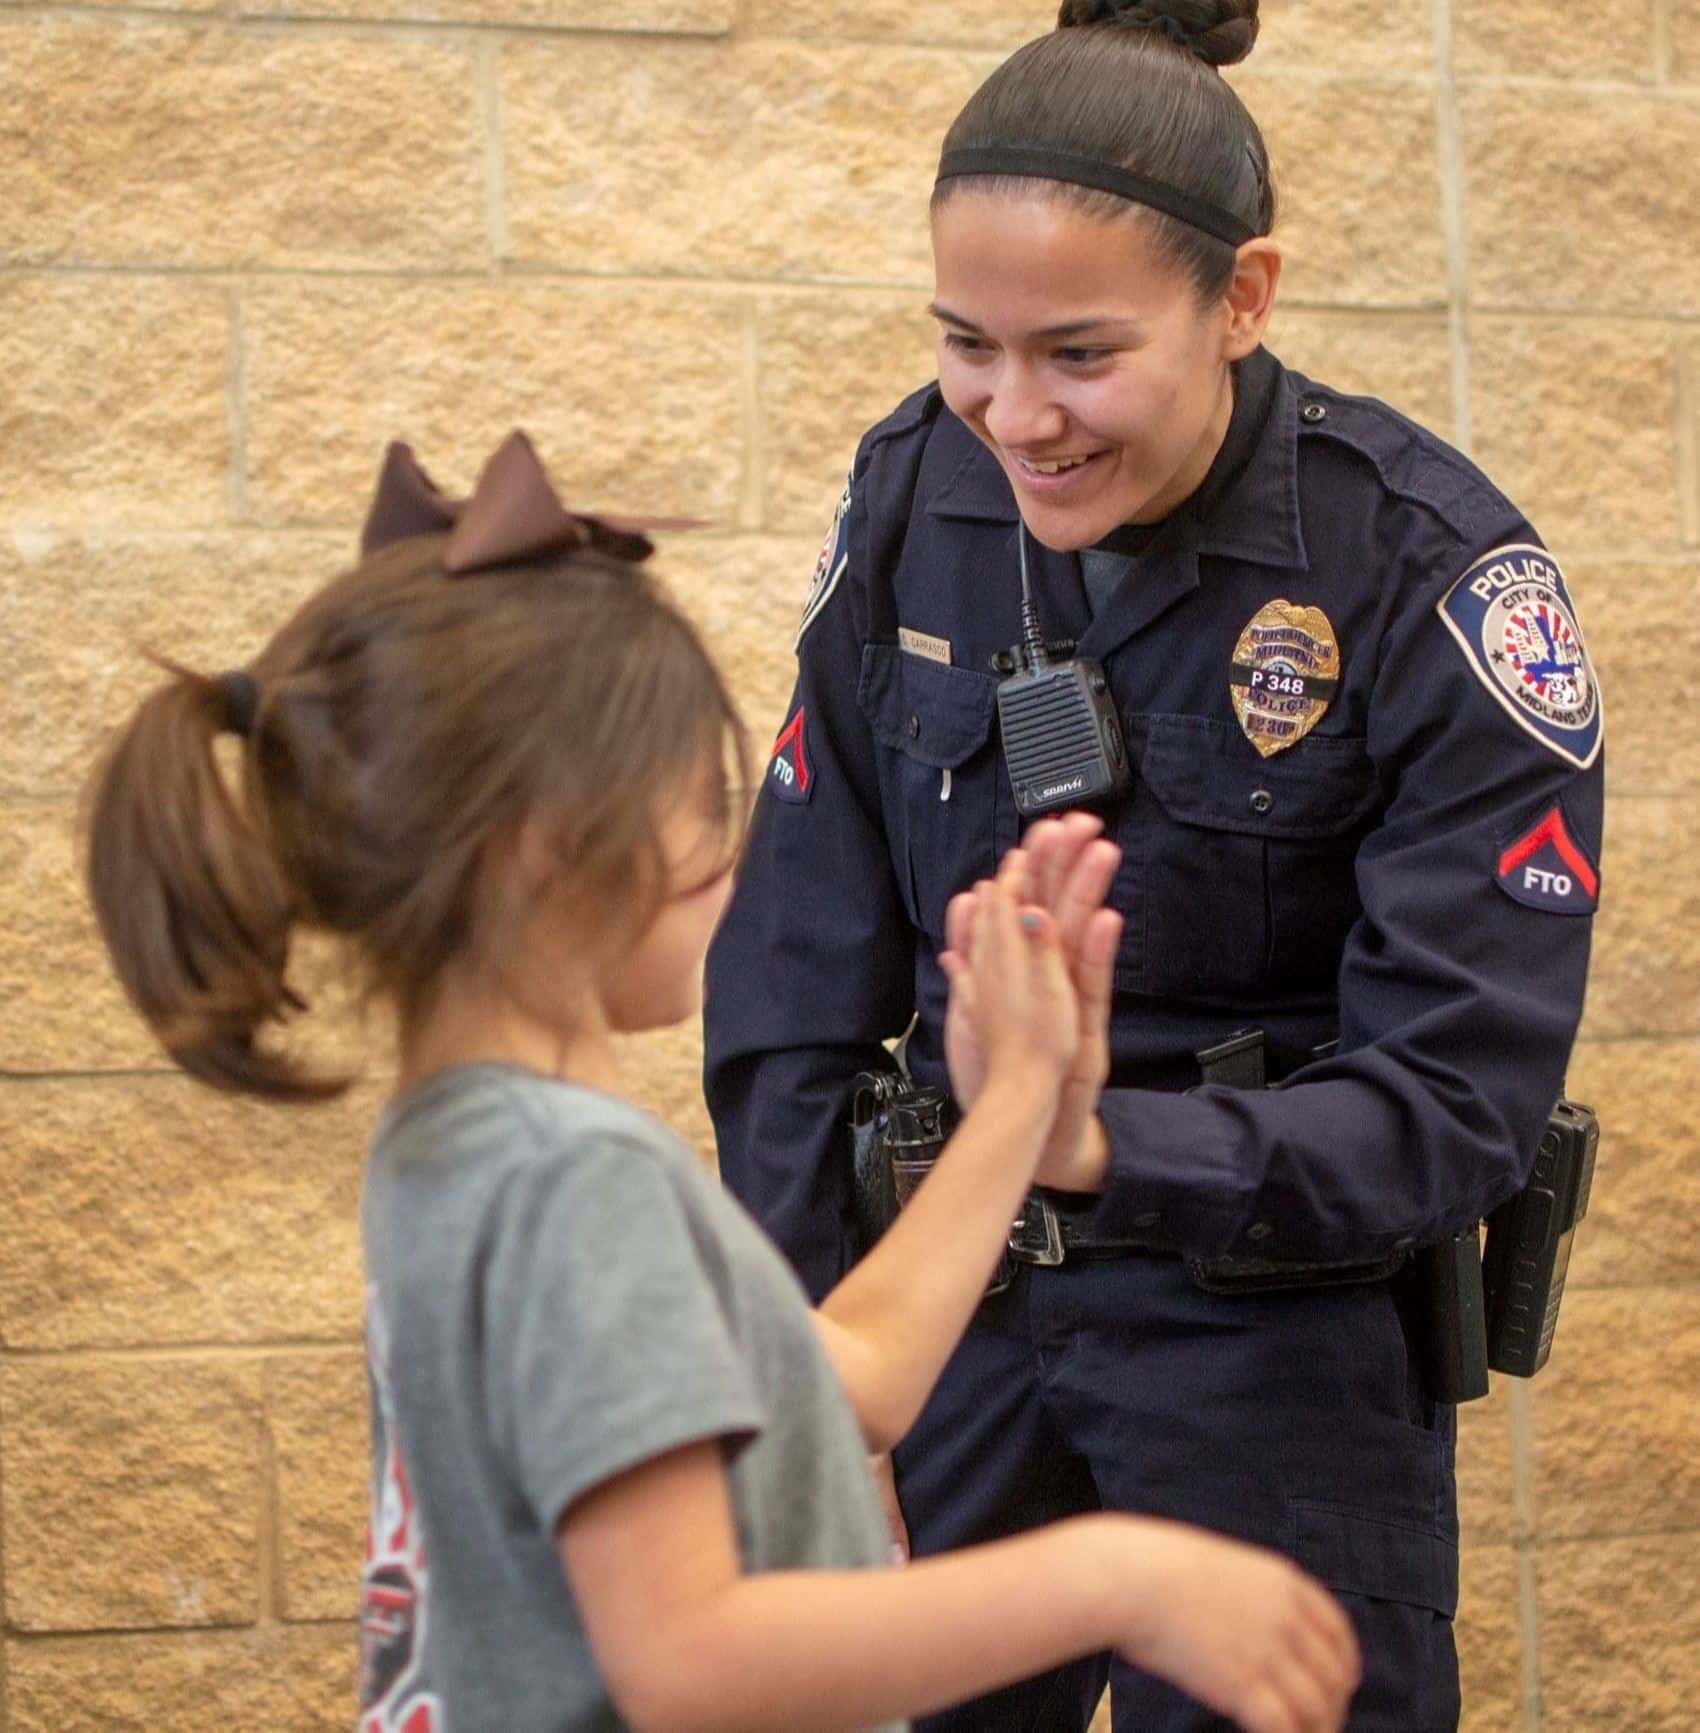 How Do You Become A Police Officer In Texas